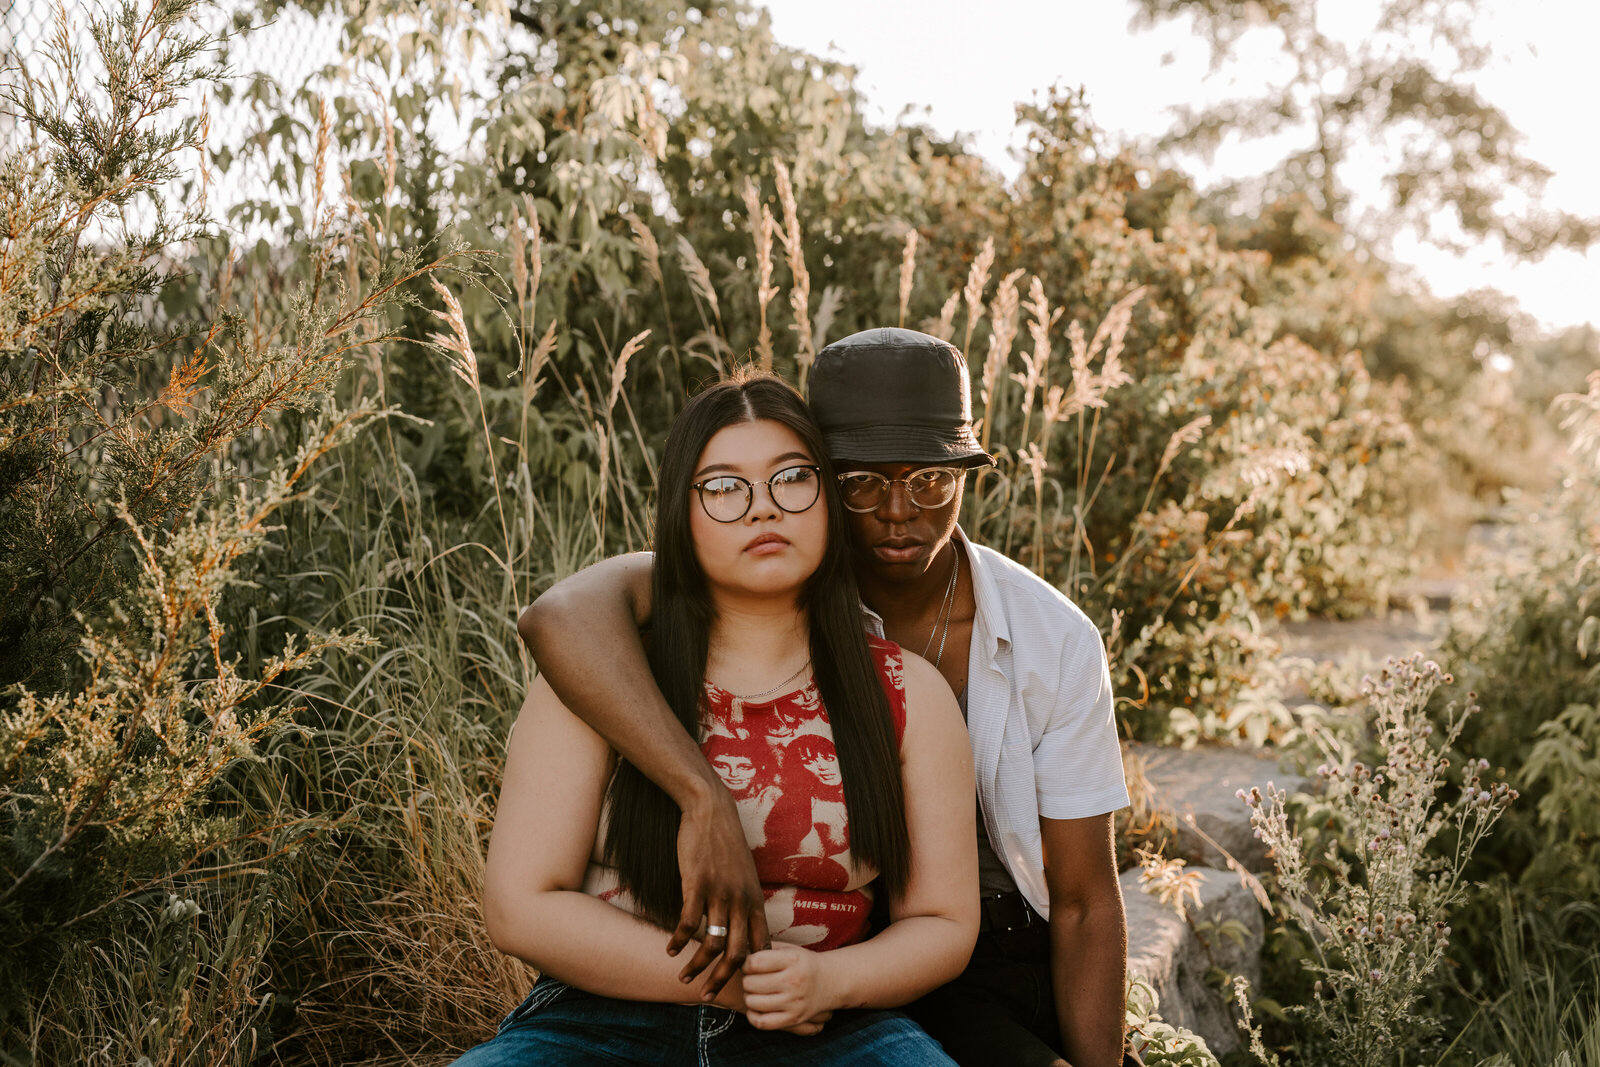 toronto-couples-session-queen-west-99-sudbury-summer-vibes-35